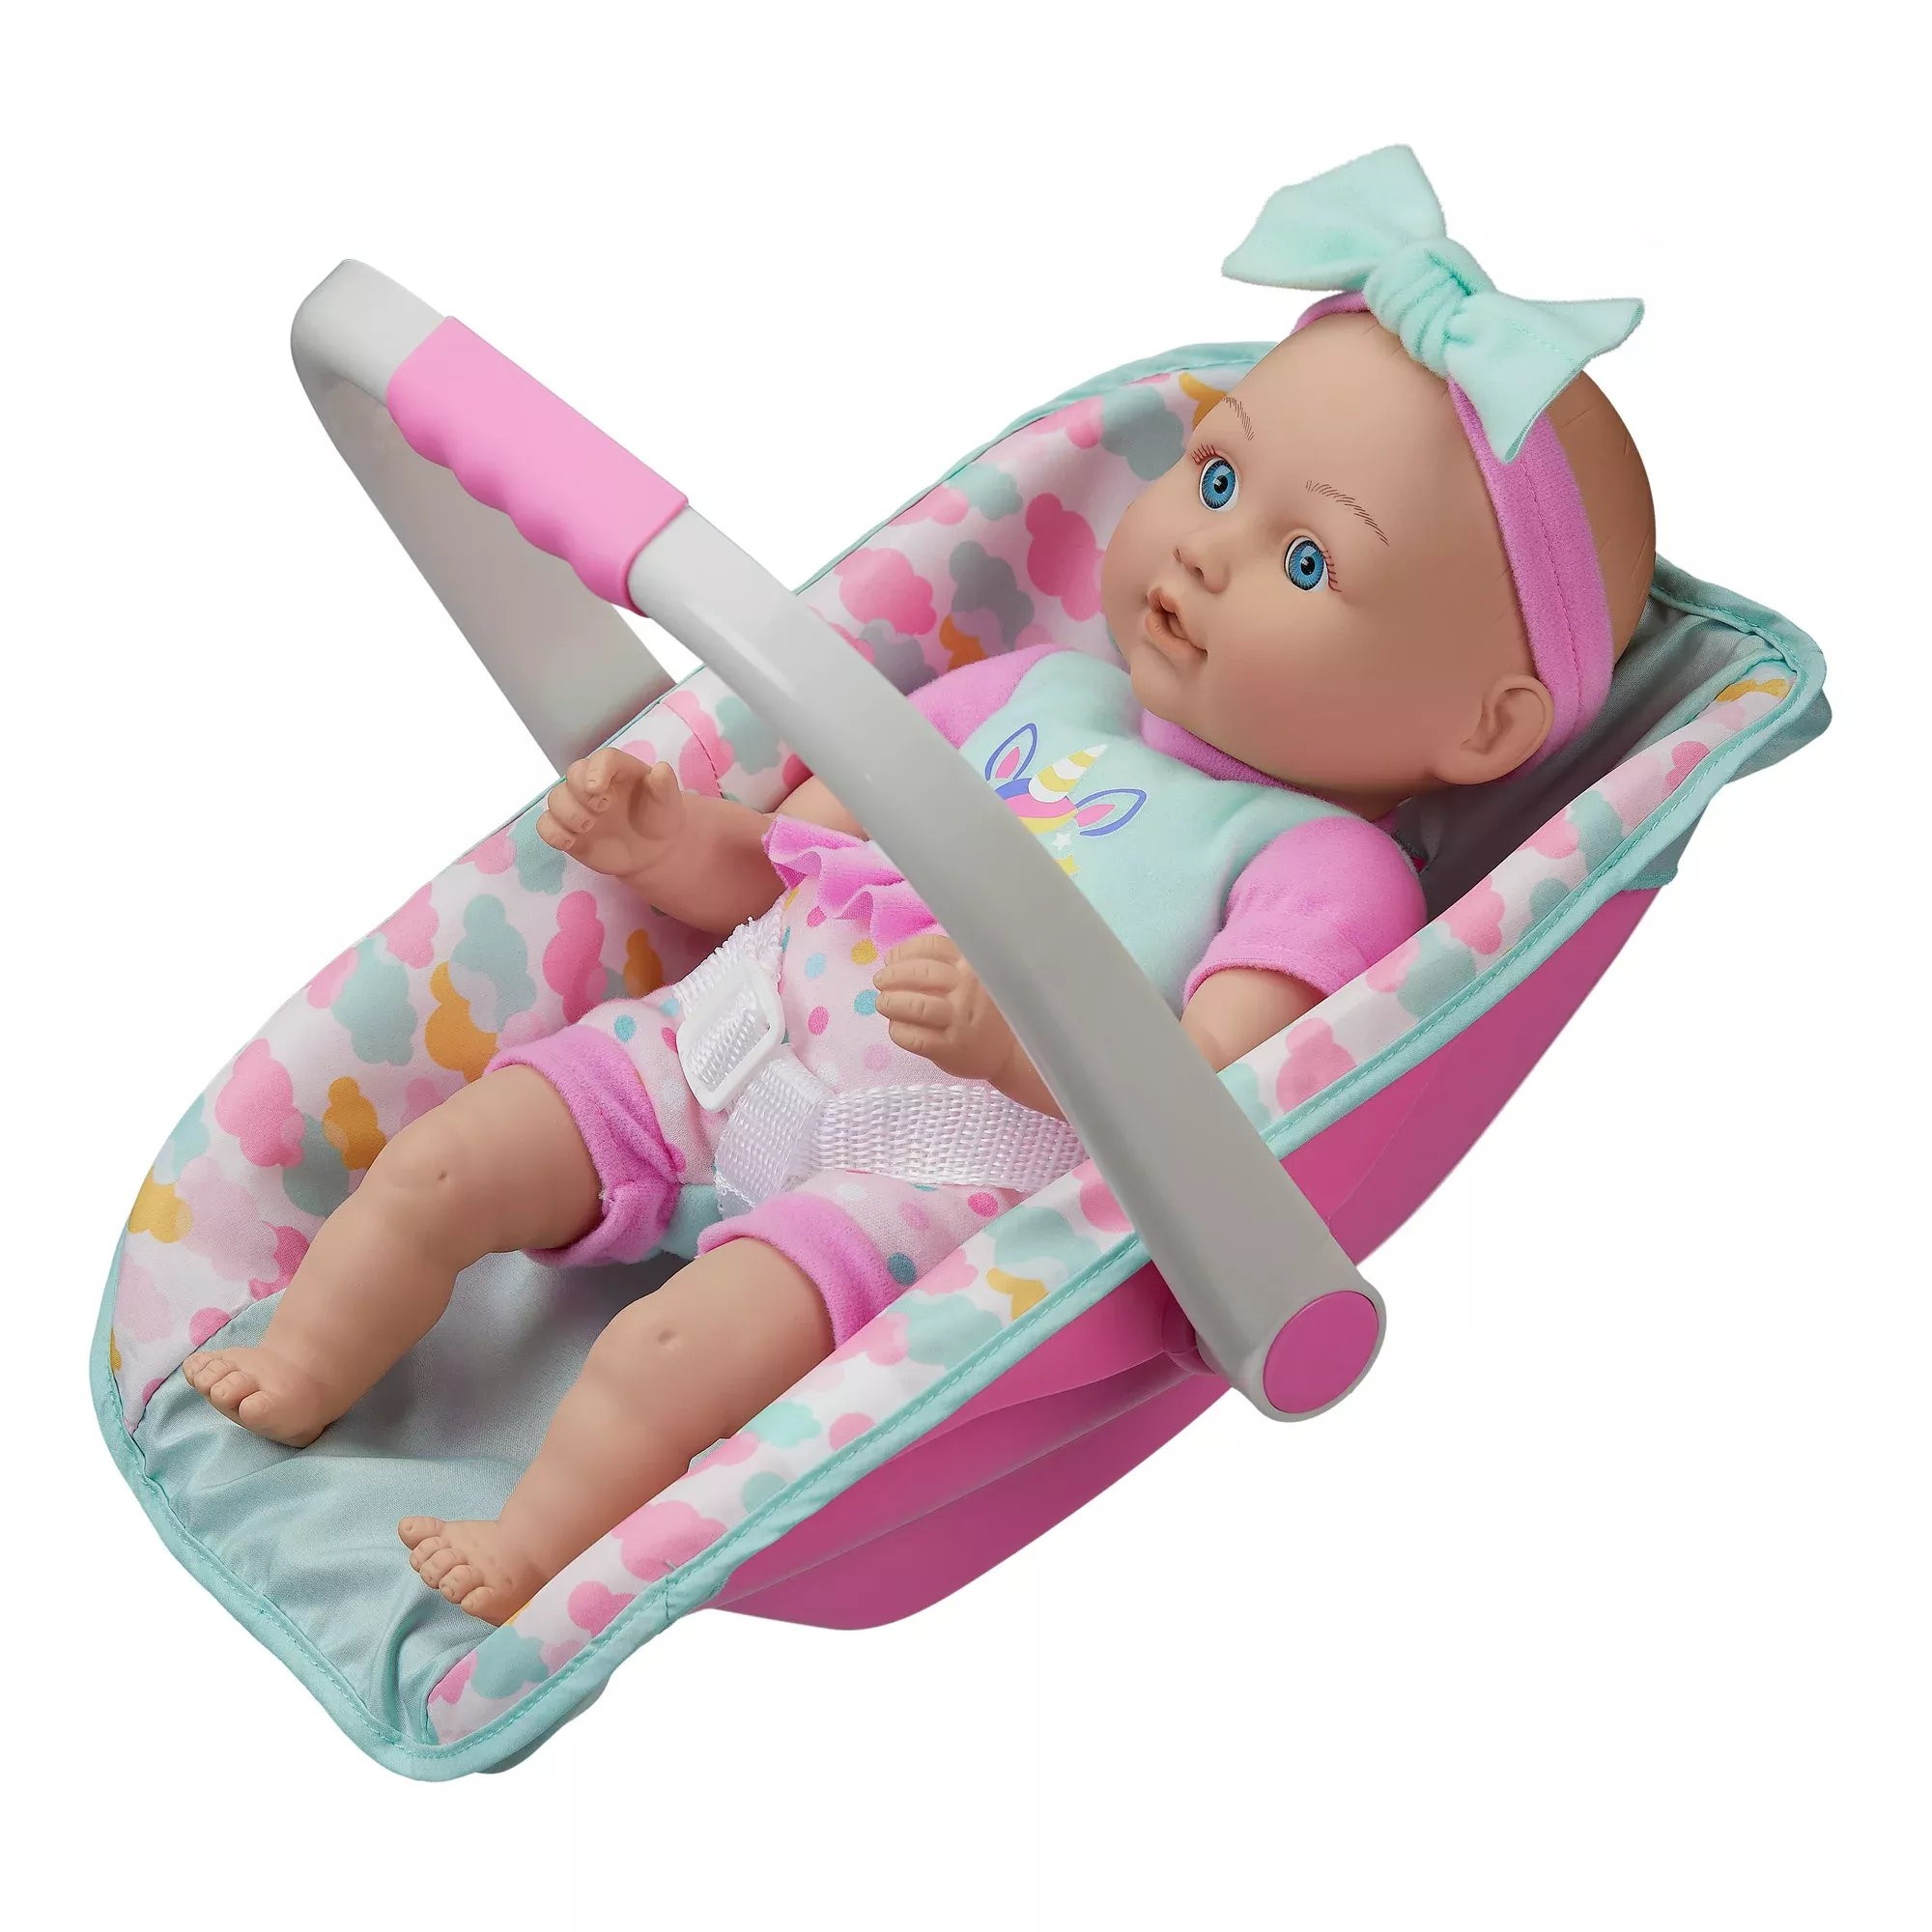 My Sweet Love Baby Doll 3-in-1 Car Seat Carrier 